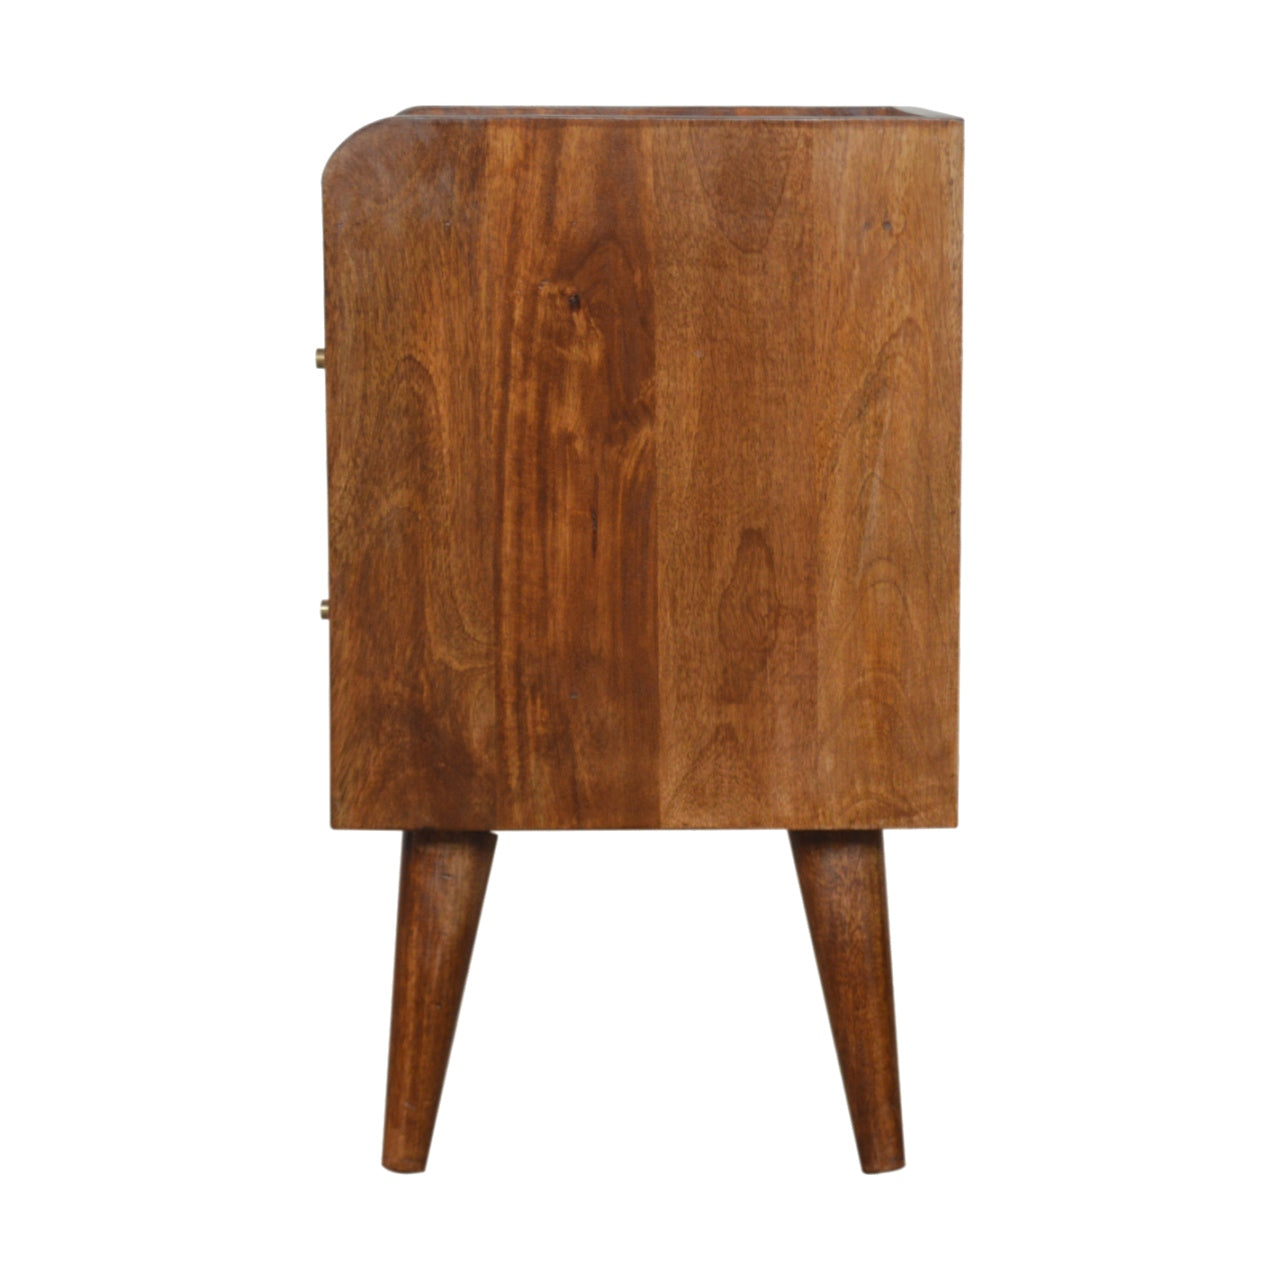 Adeline Bedside Table, Chestnut Abstract & Gold Inlay - Broxle